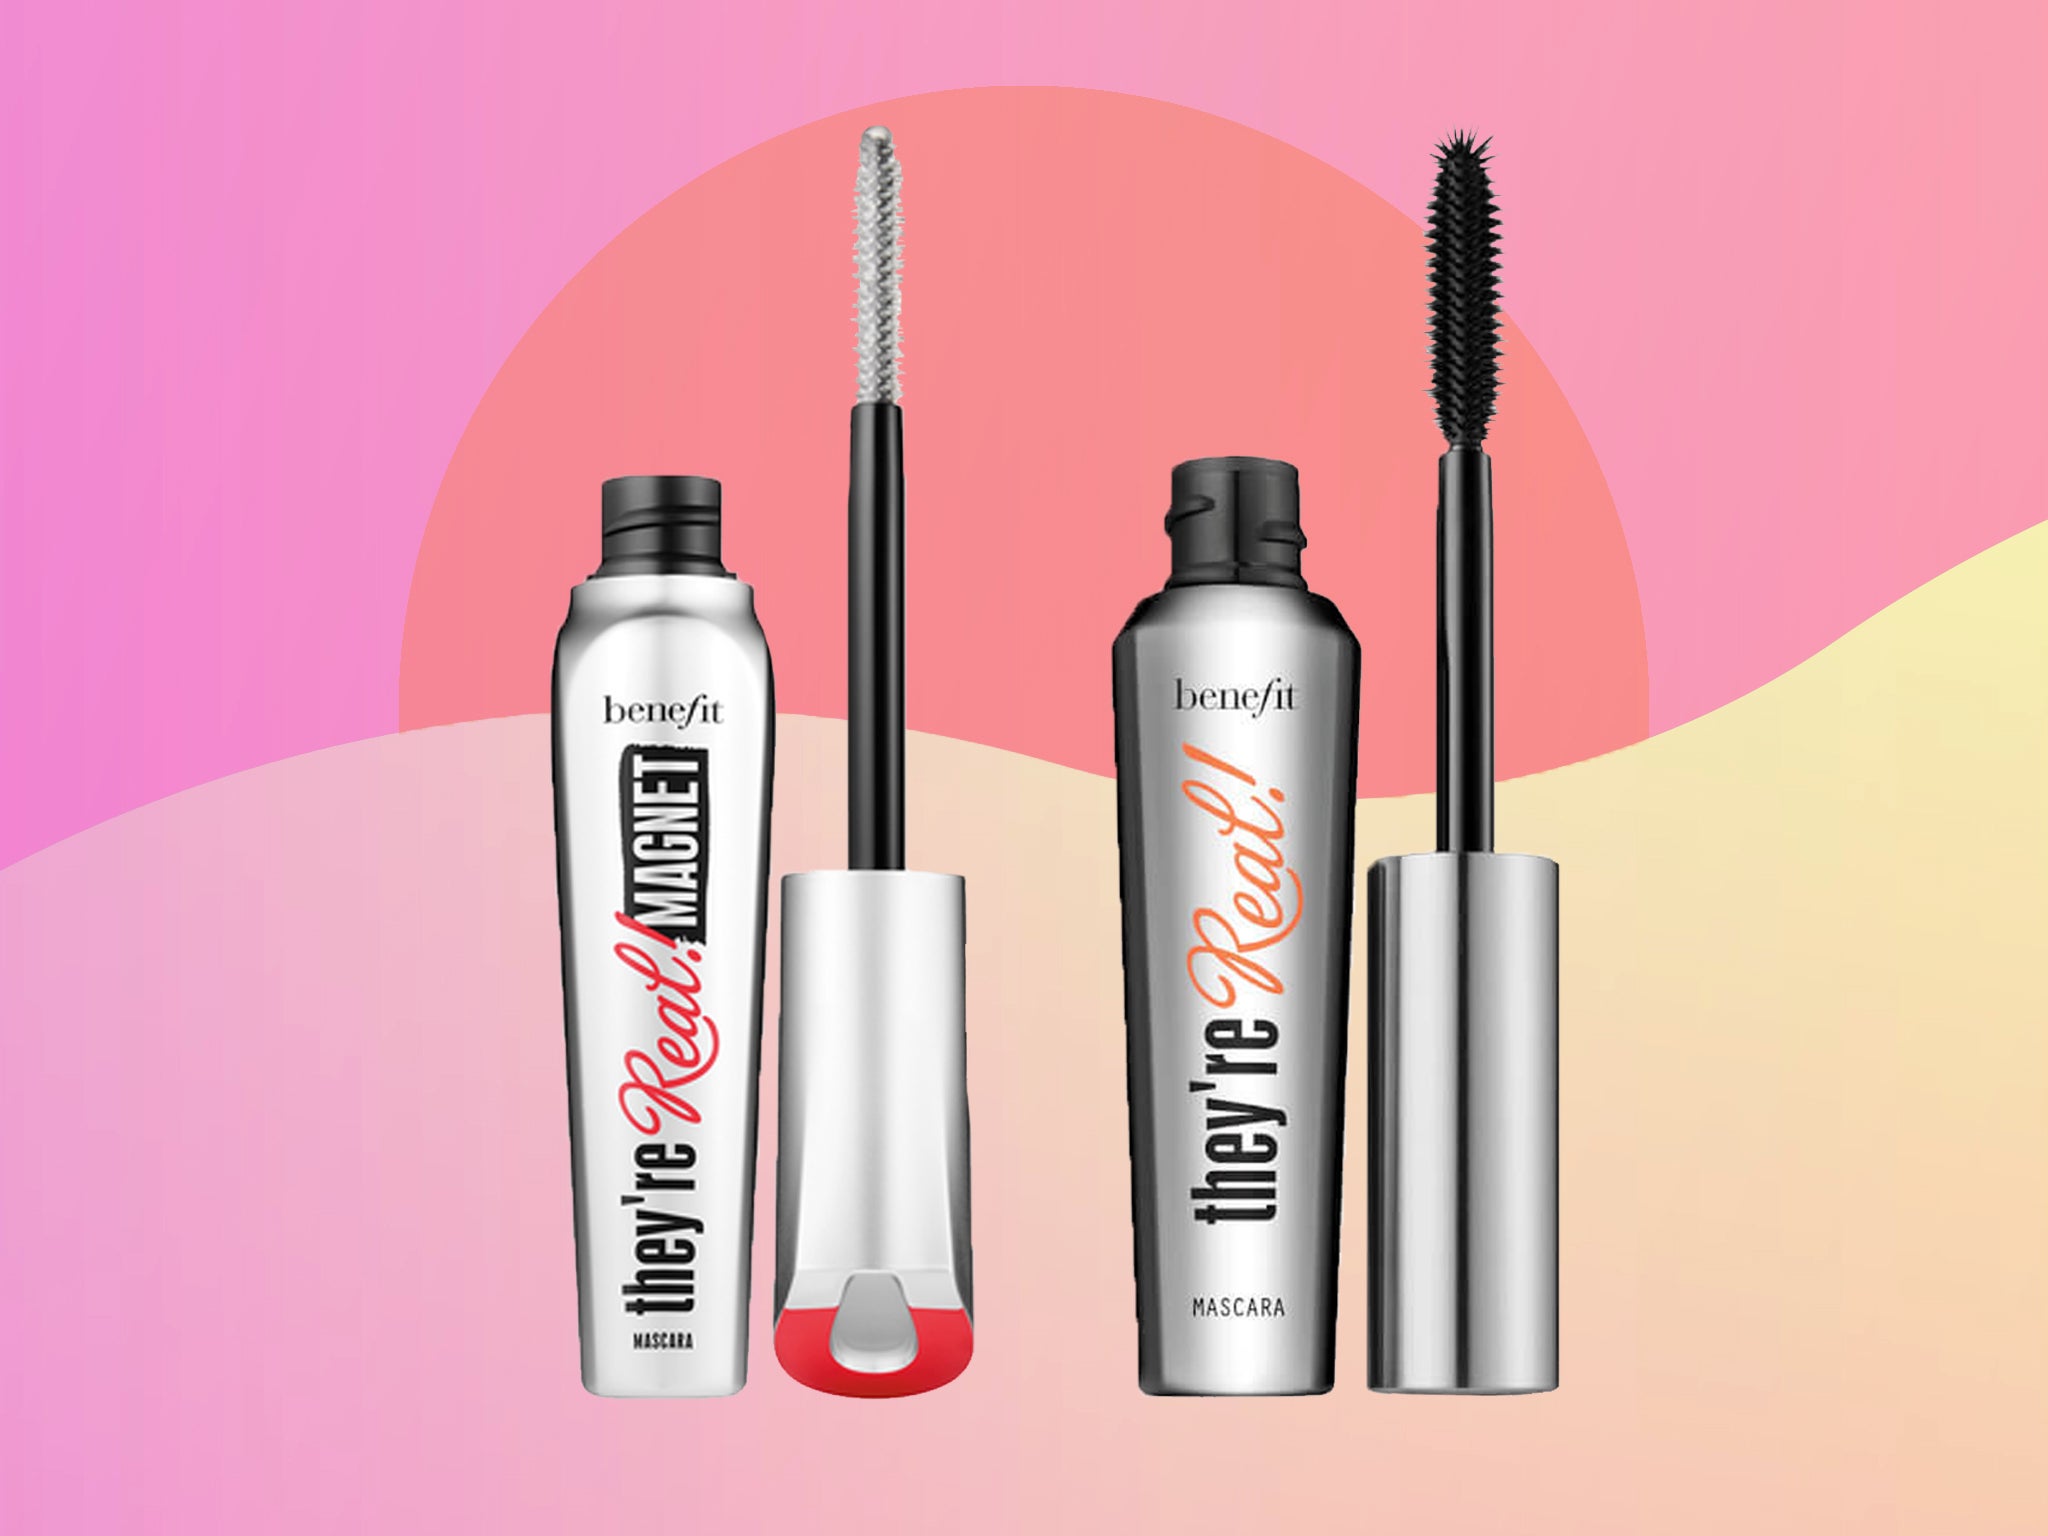 The original ‘They’re Real!’ mascara has inspired a whole product range since its launch in 2011